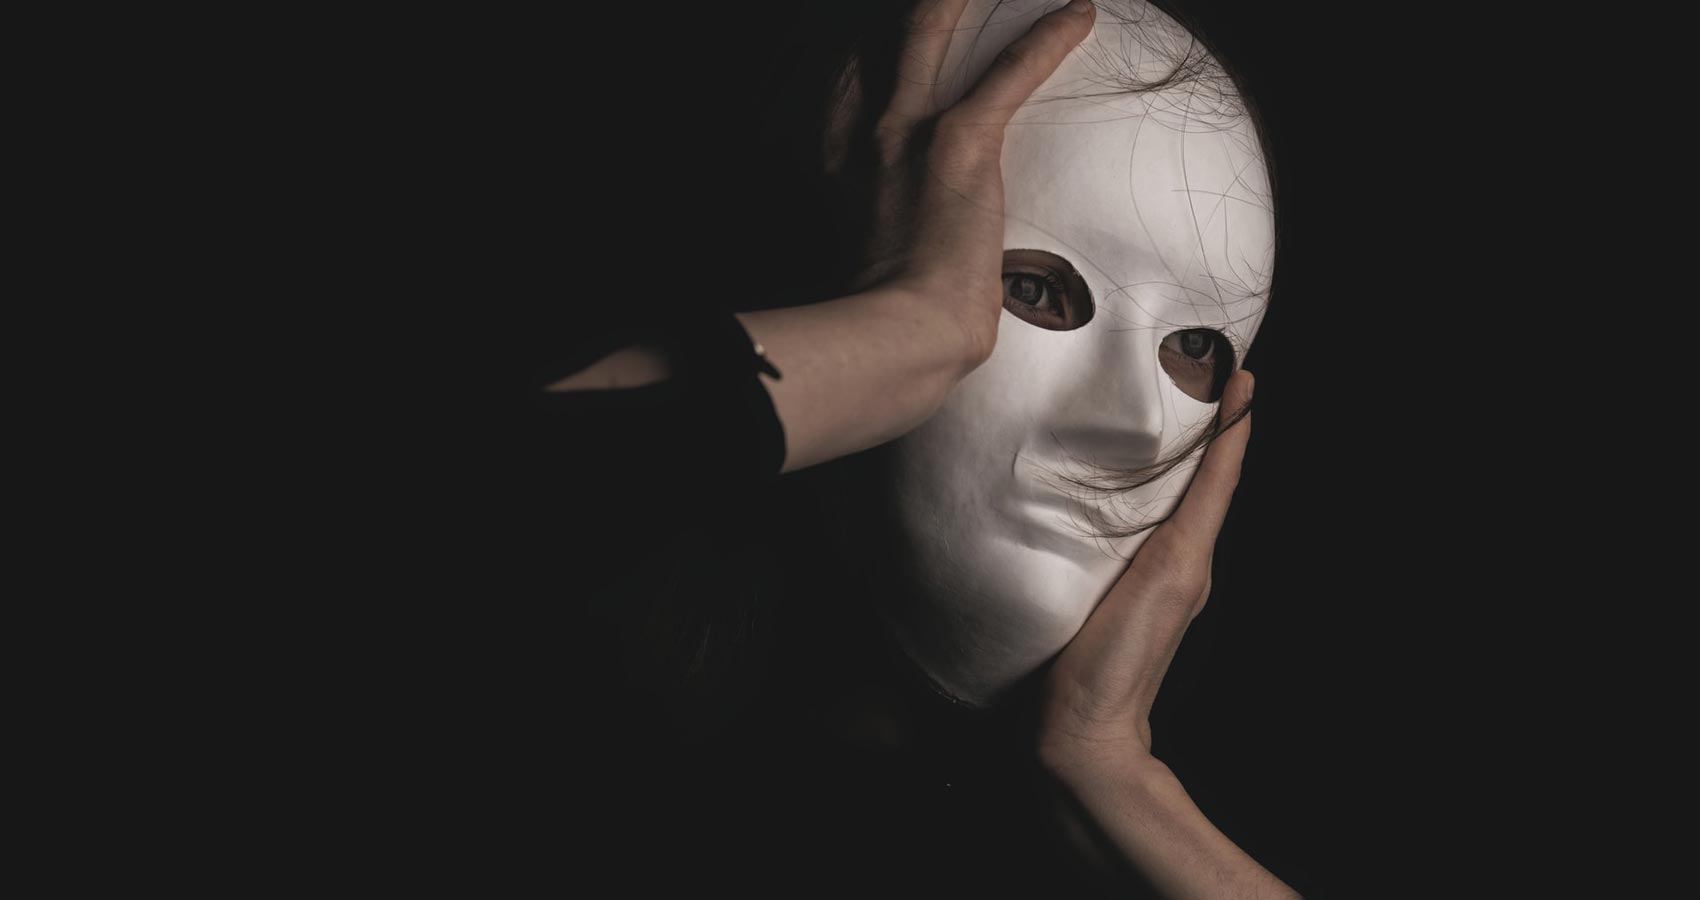 Mask Theater, a poem by Katarzyna Dominik at Spillwords.com